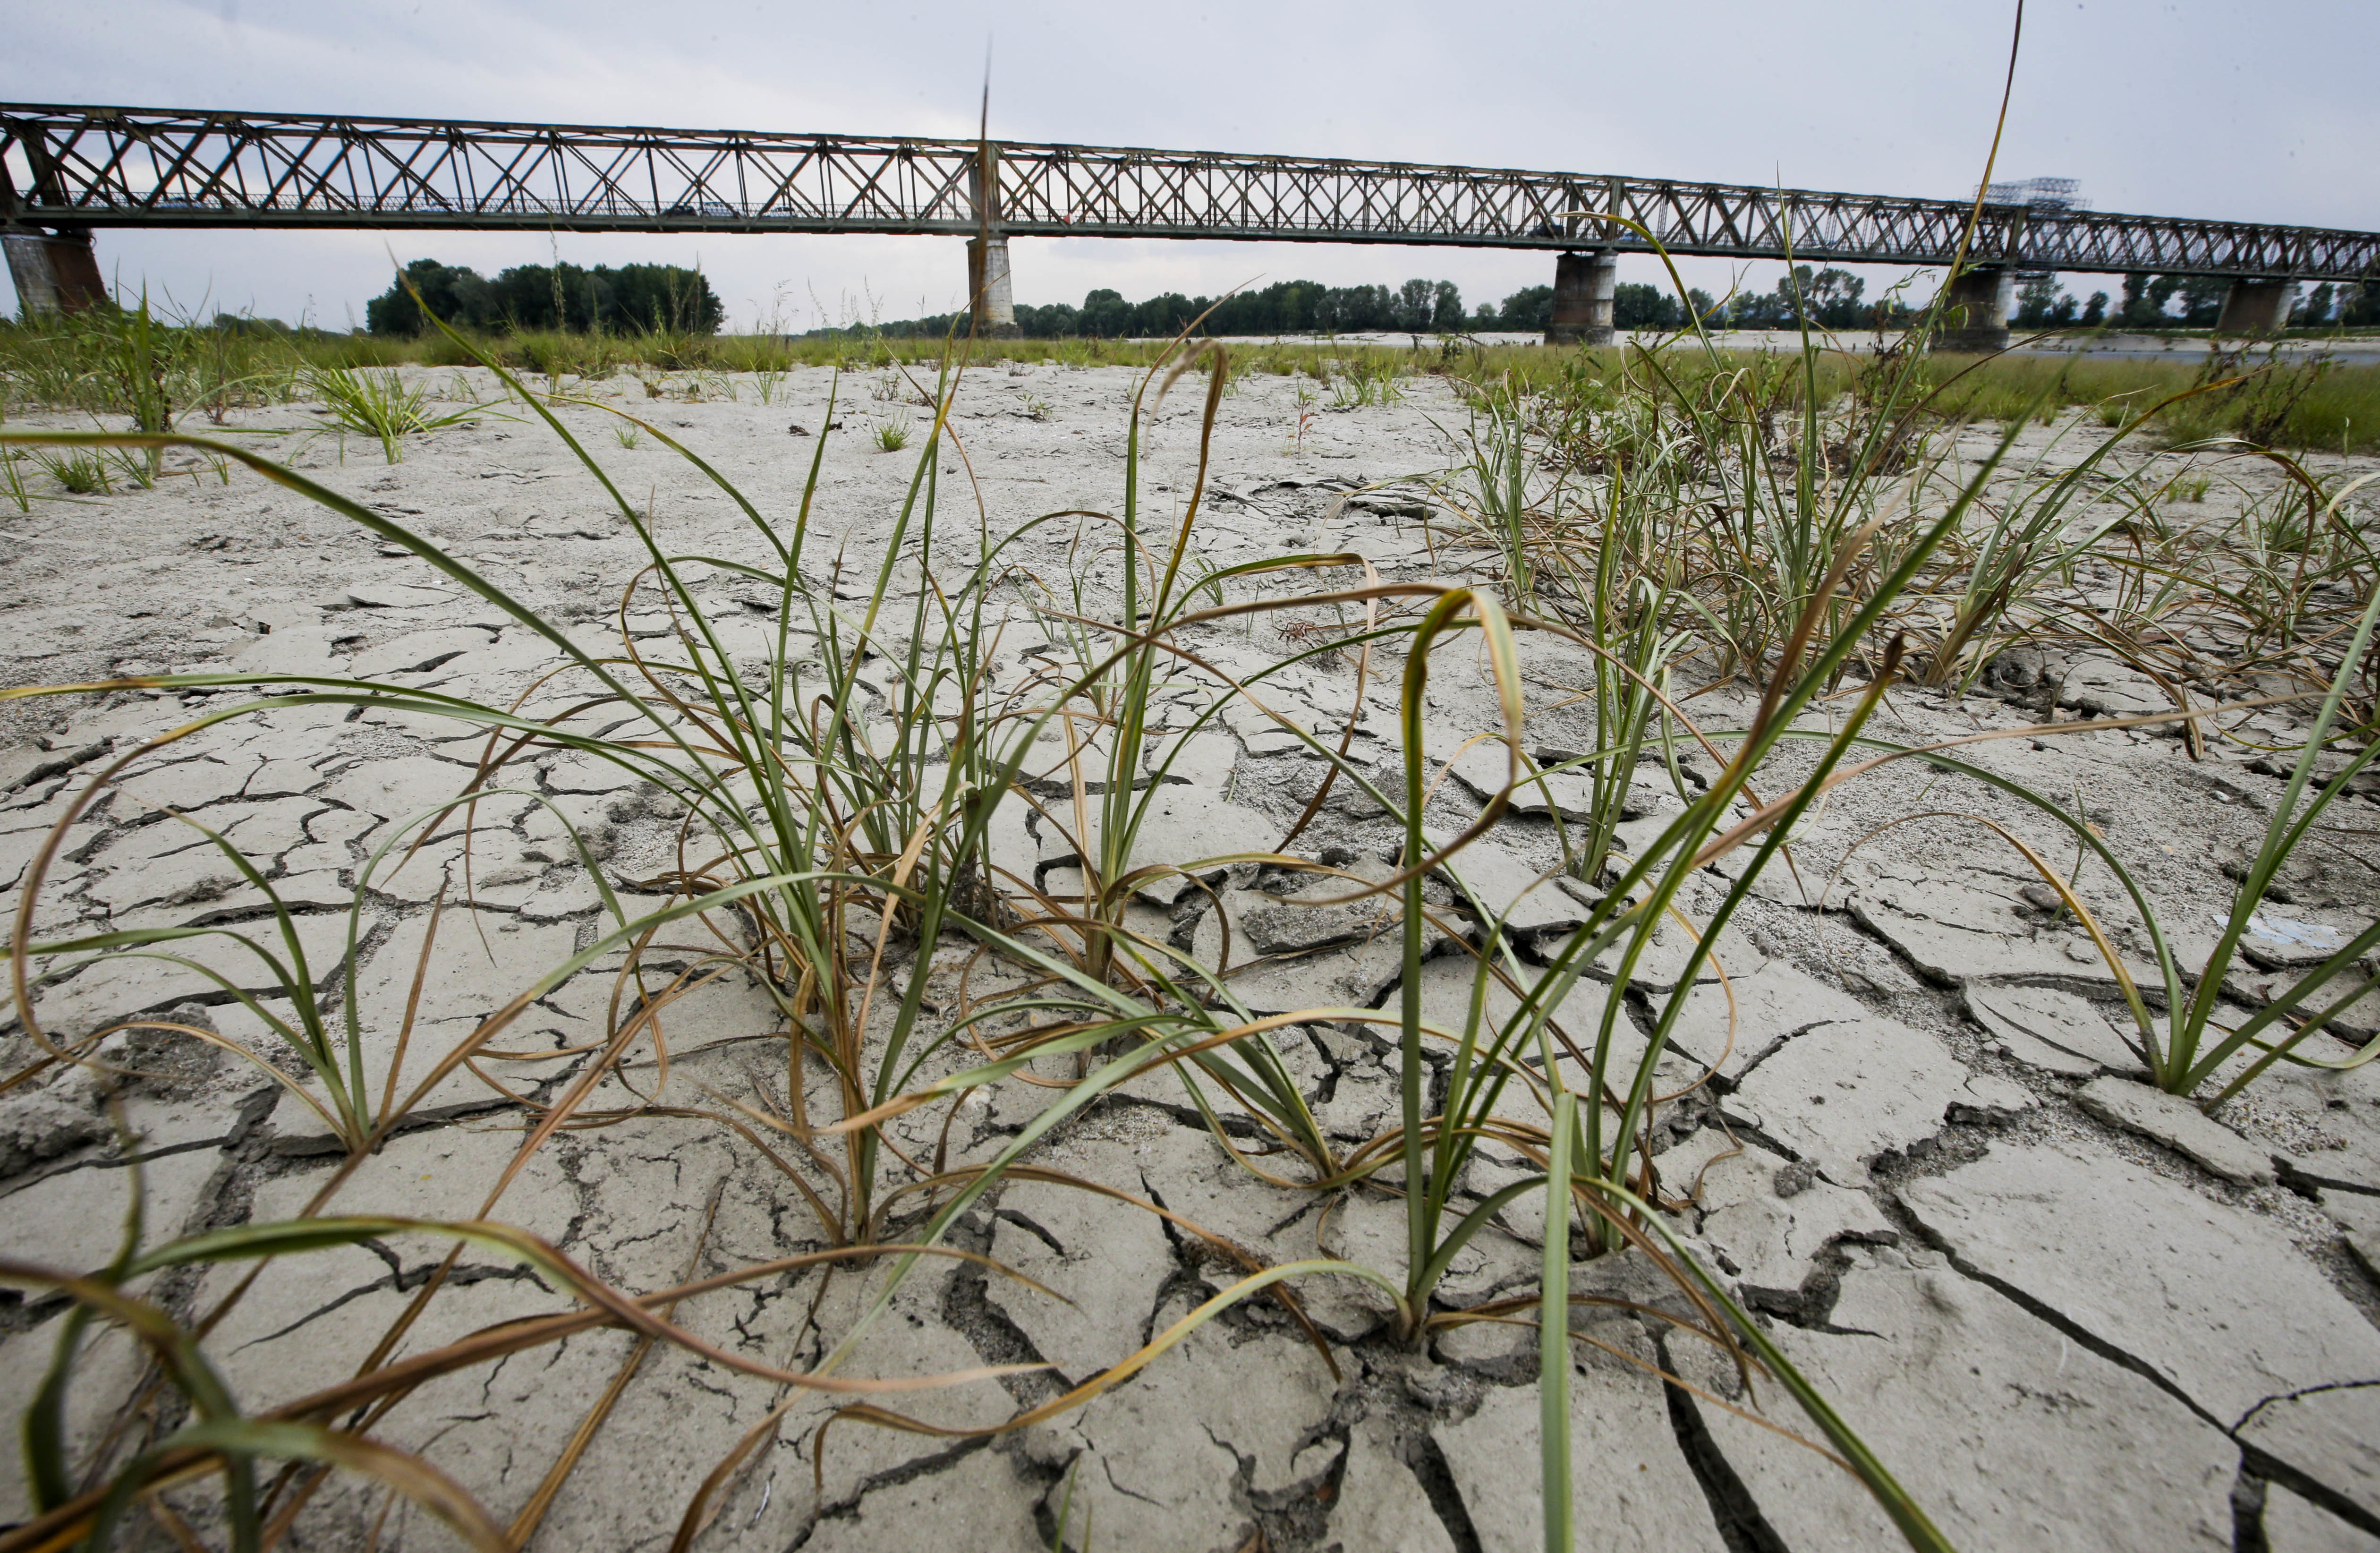 A view of the Ponte della Becca (Becca bridge) shows low water levels across the Po river, near Pavia, Italy, Monday, July 24, 2017. Sky TG24 TV meteorologists noted on Sunday that Italy had experienced one of its driest springs in some 60 years and that some parts of the country had seen rainfall totals 80 percent below normal. (AP Photo/Luca Bruno)